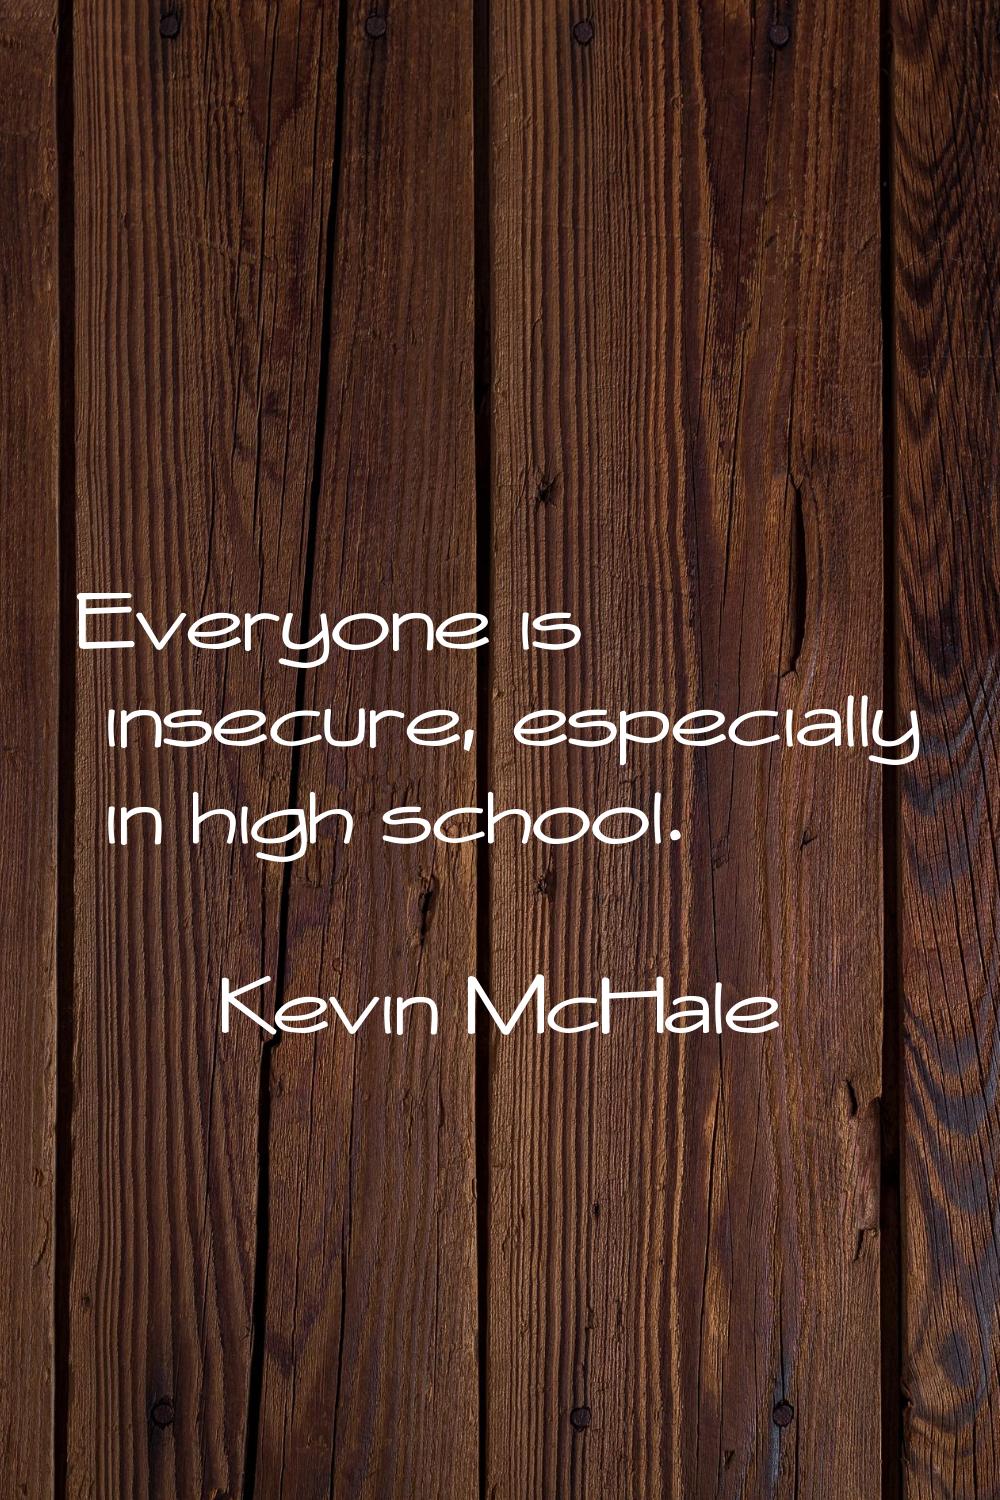 Everyone is insecure, especially in high school.